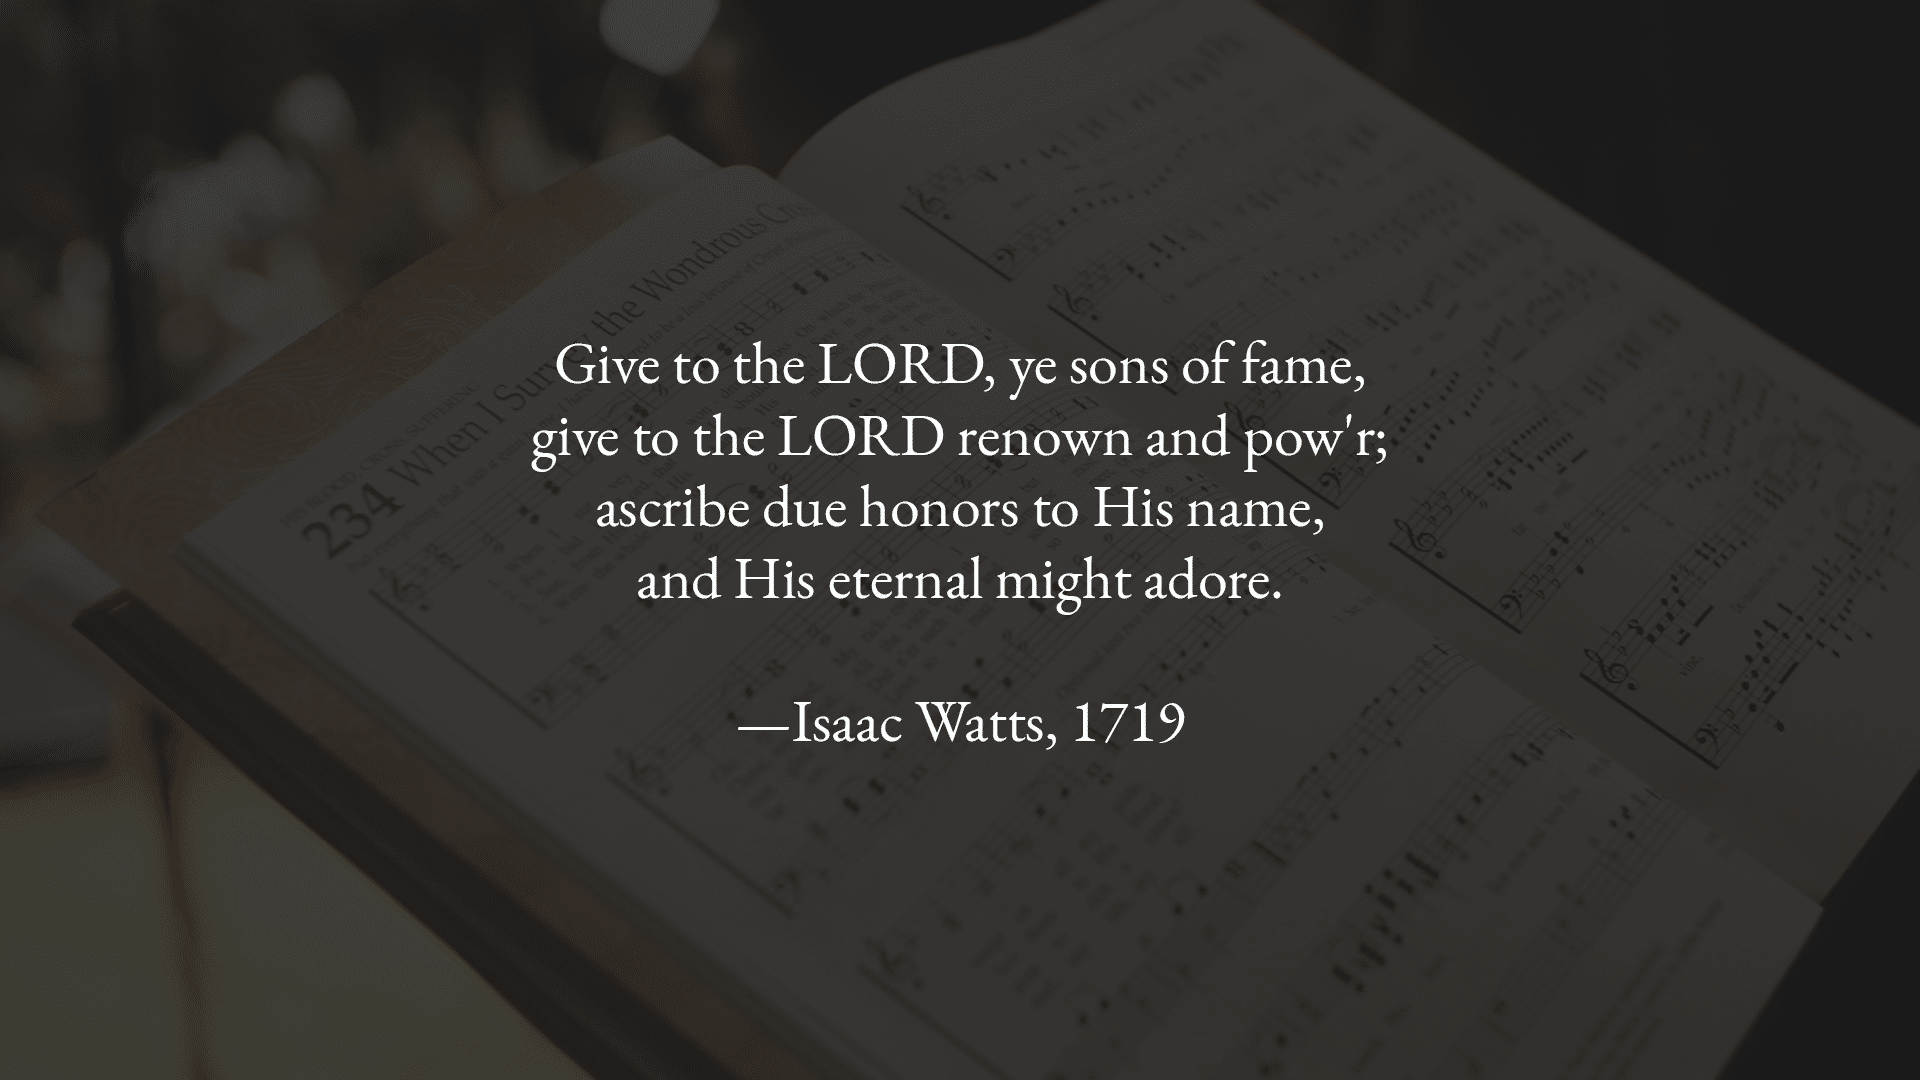 Give to the Lord, Ye Sons of Fame (Ps 29)